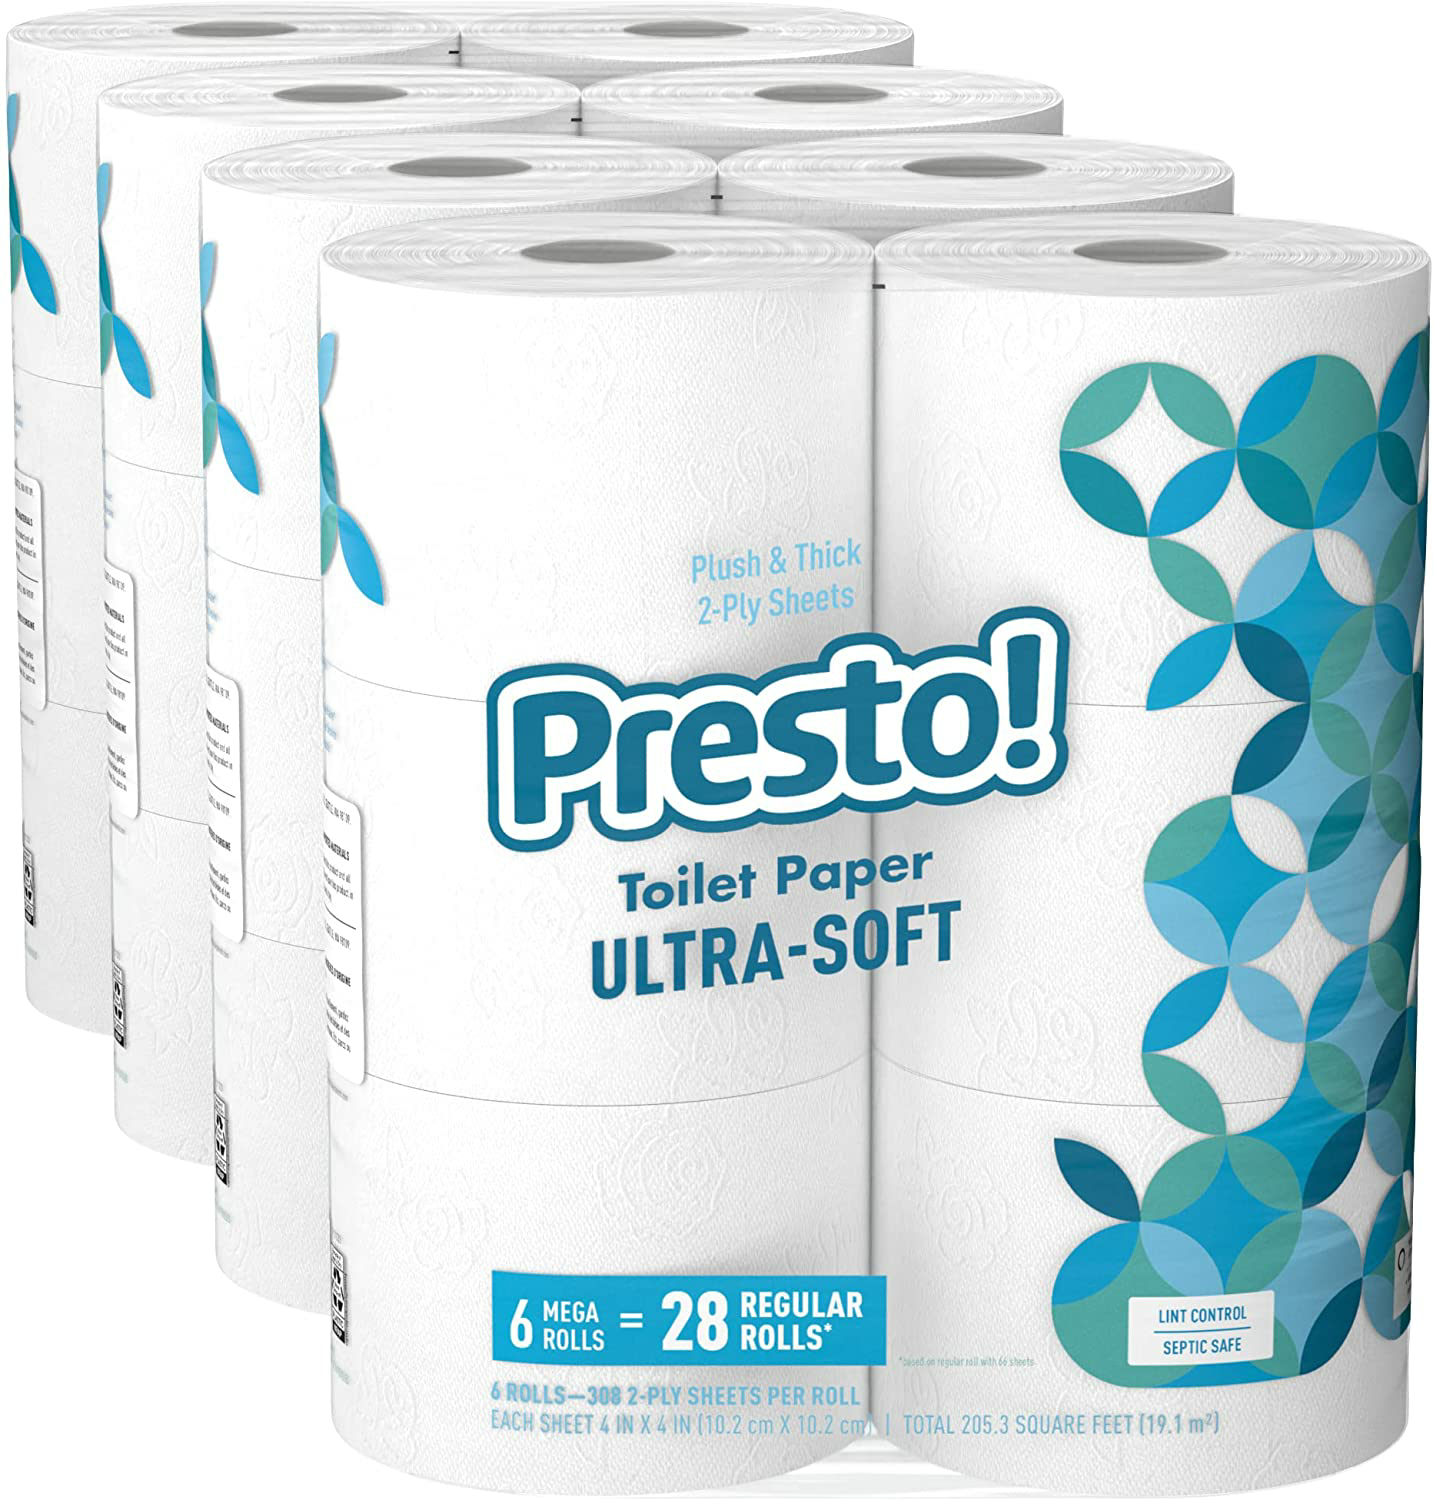 3x Presto! 308-Sheet Mega Roll Toilet Paper, Ultra-Soft, 6 Count (Pack of 4) must buy 3 for promo $53.22